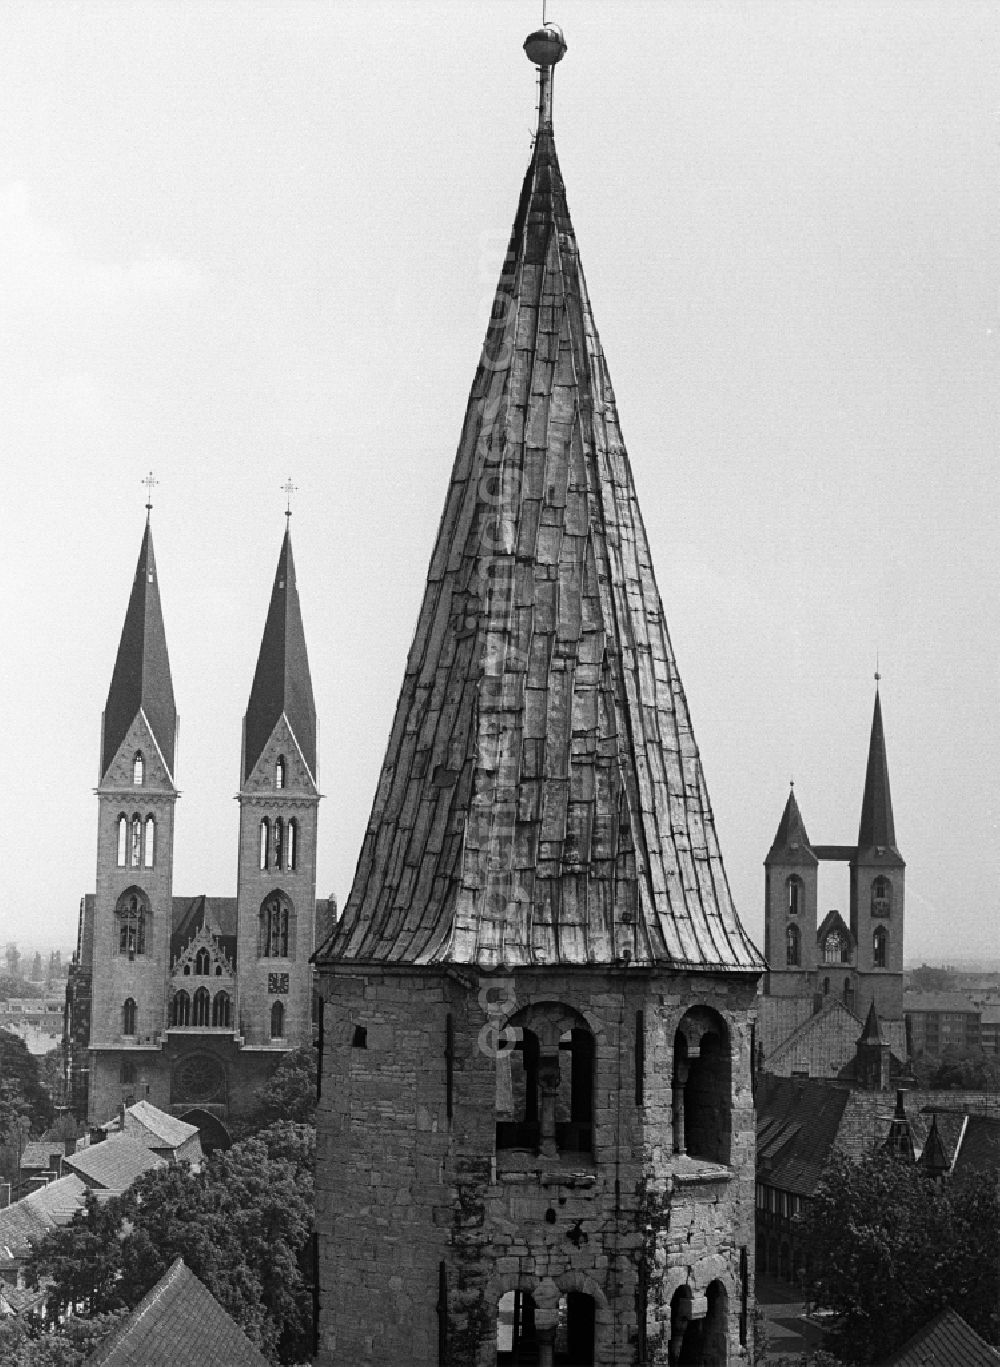 Halberstadt: Bell tower of the sacred building of the church Liebfrauenkirche, Martinikirche und Dom in Halberstadt in the state Saxony-Anhalt on the territory of the former GDR, German Democratic Republic